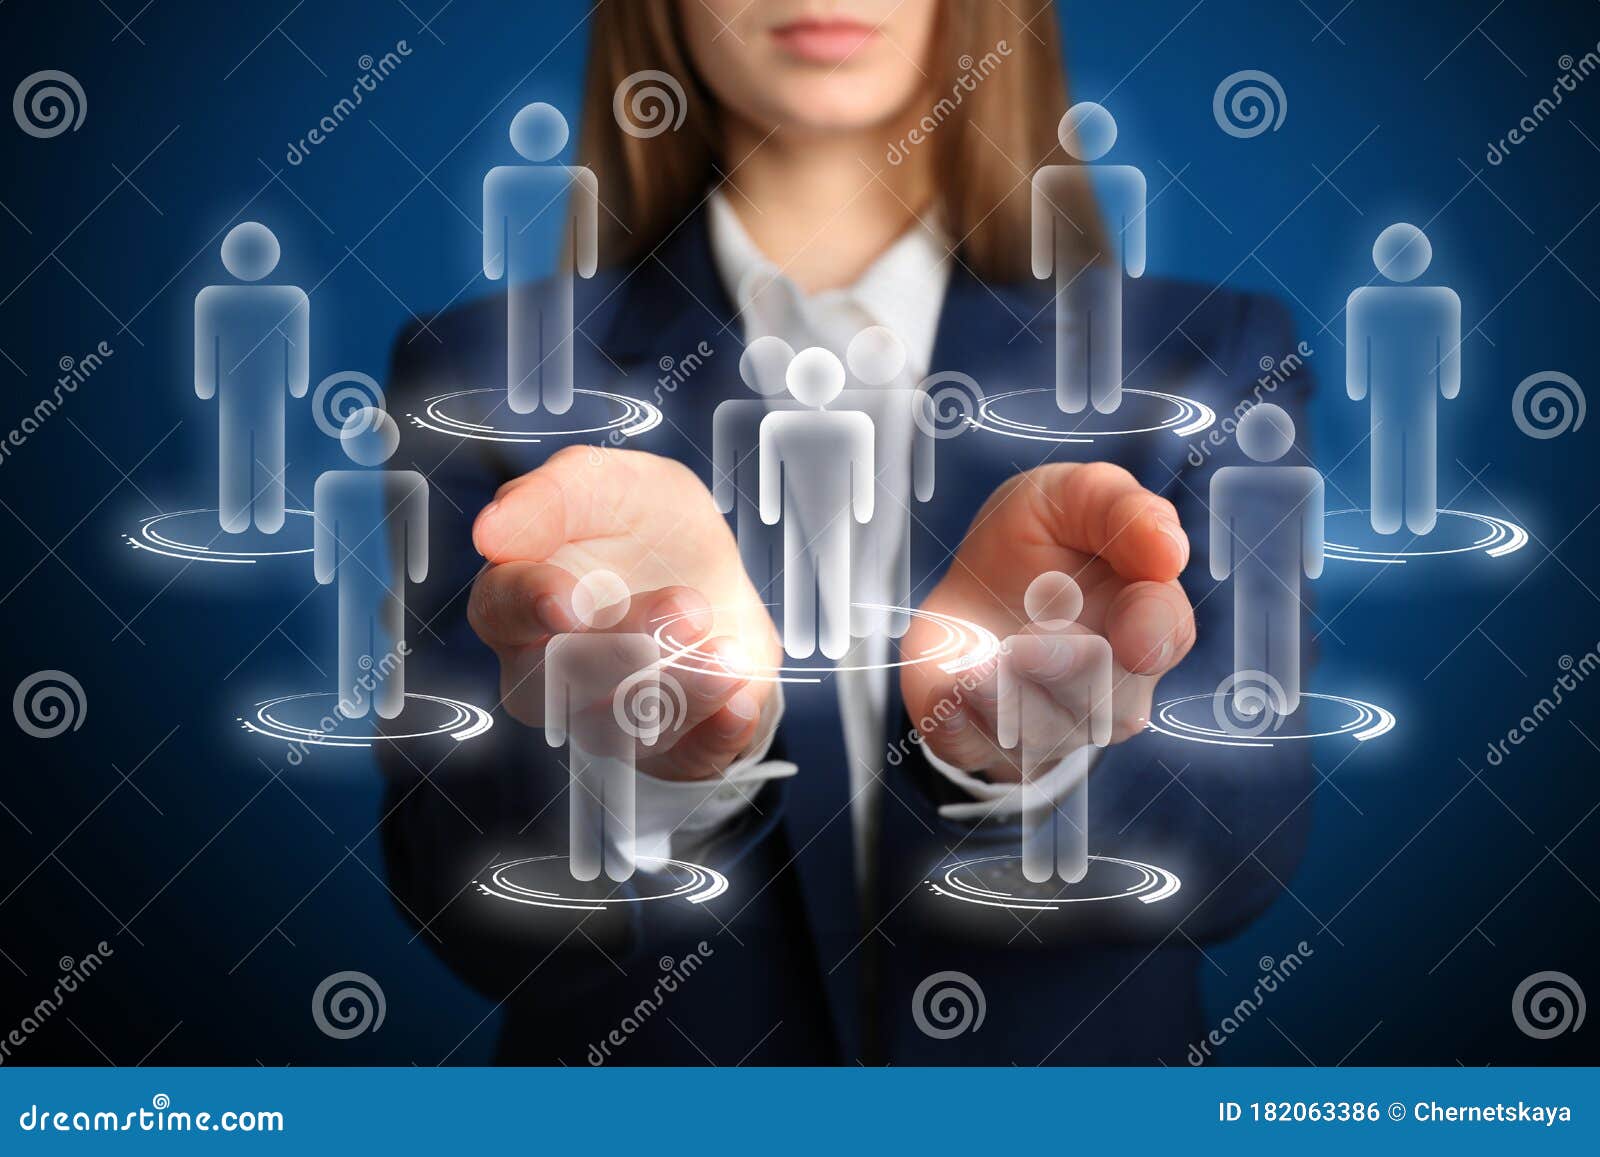 Woman Demonstrating Virtual Structure Of Organization. Business ...